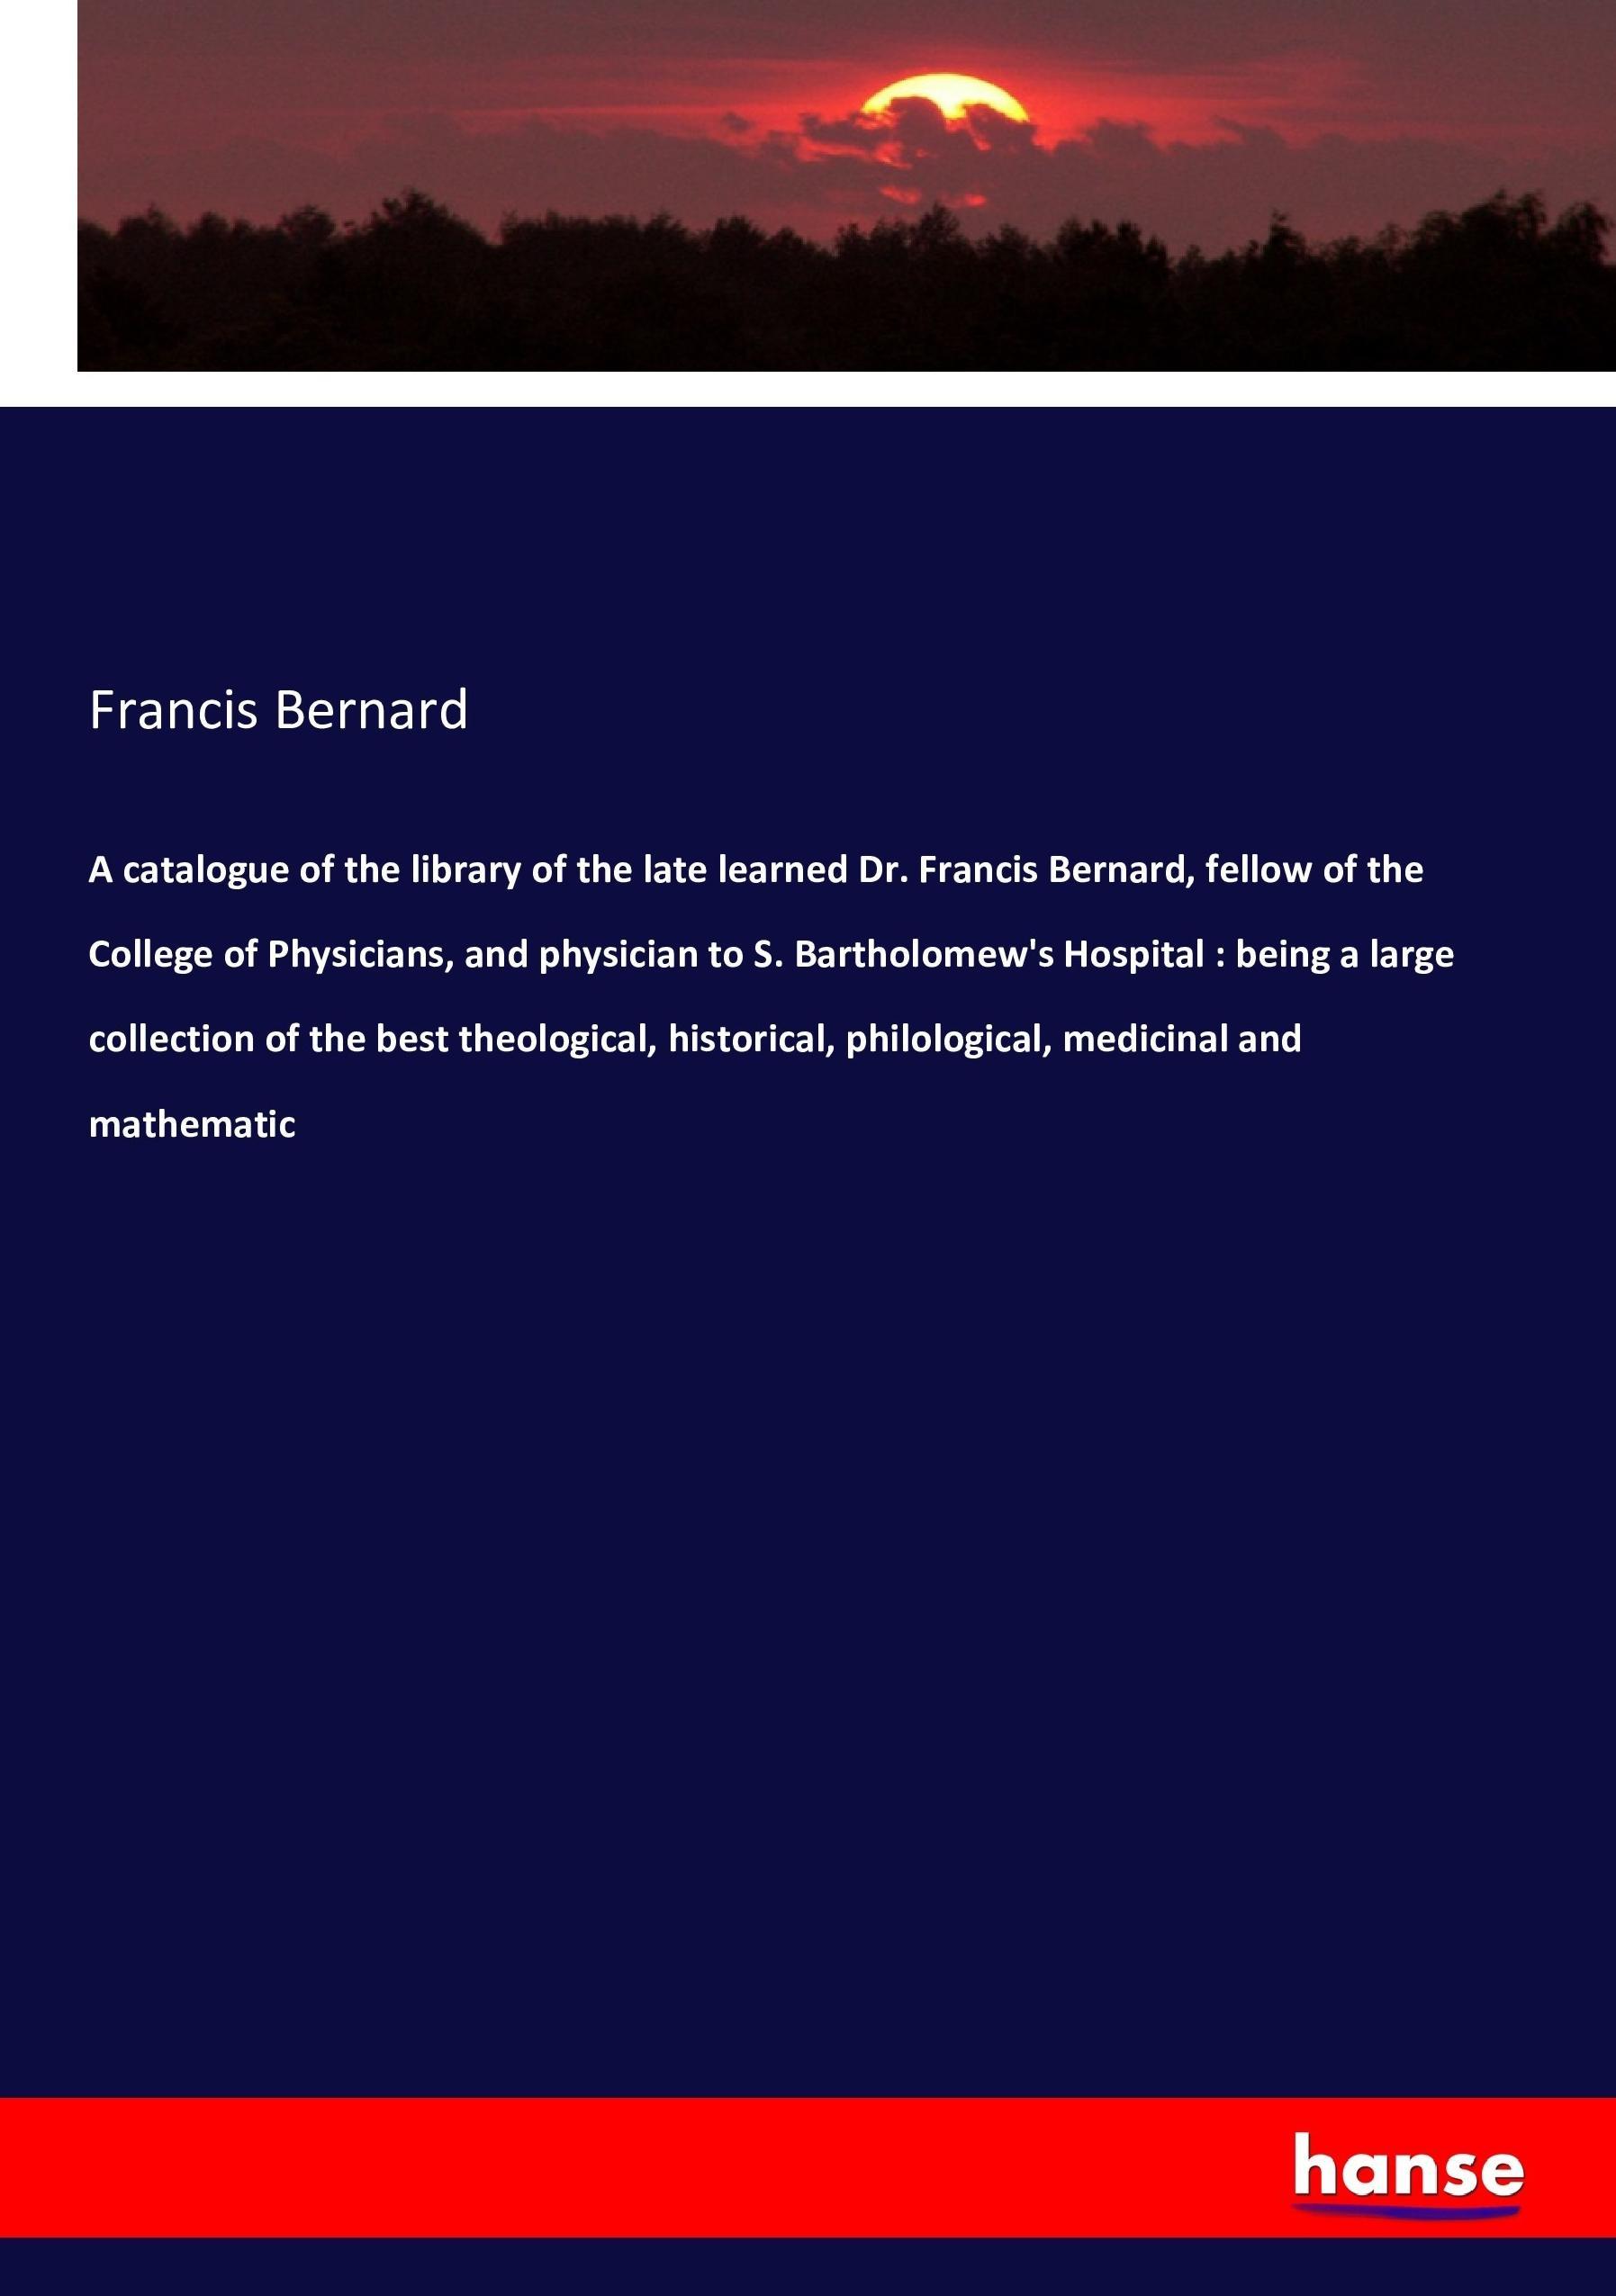 A catalogue of the library of the late learned Dr. Francis Bernard, fellow of the College of Physicians, and physician to S. Bartholomew s Hospital : being a large collection of the best theological, historical, philological, medicinal and mathematic - Bernard, Francis